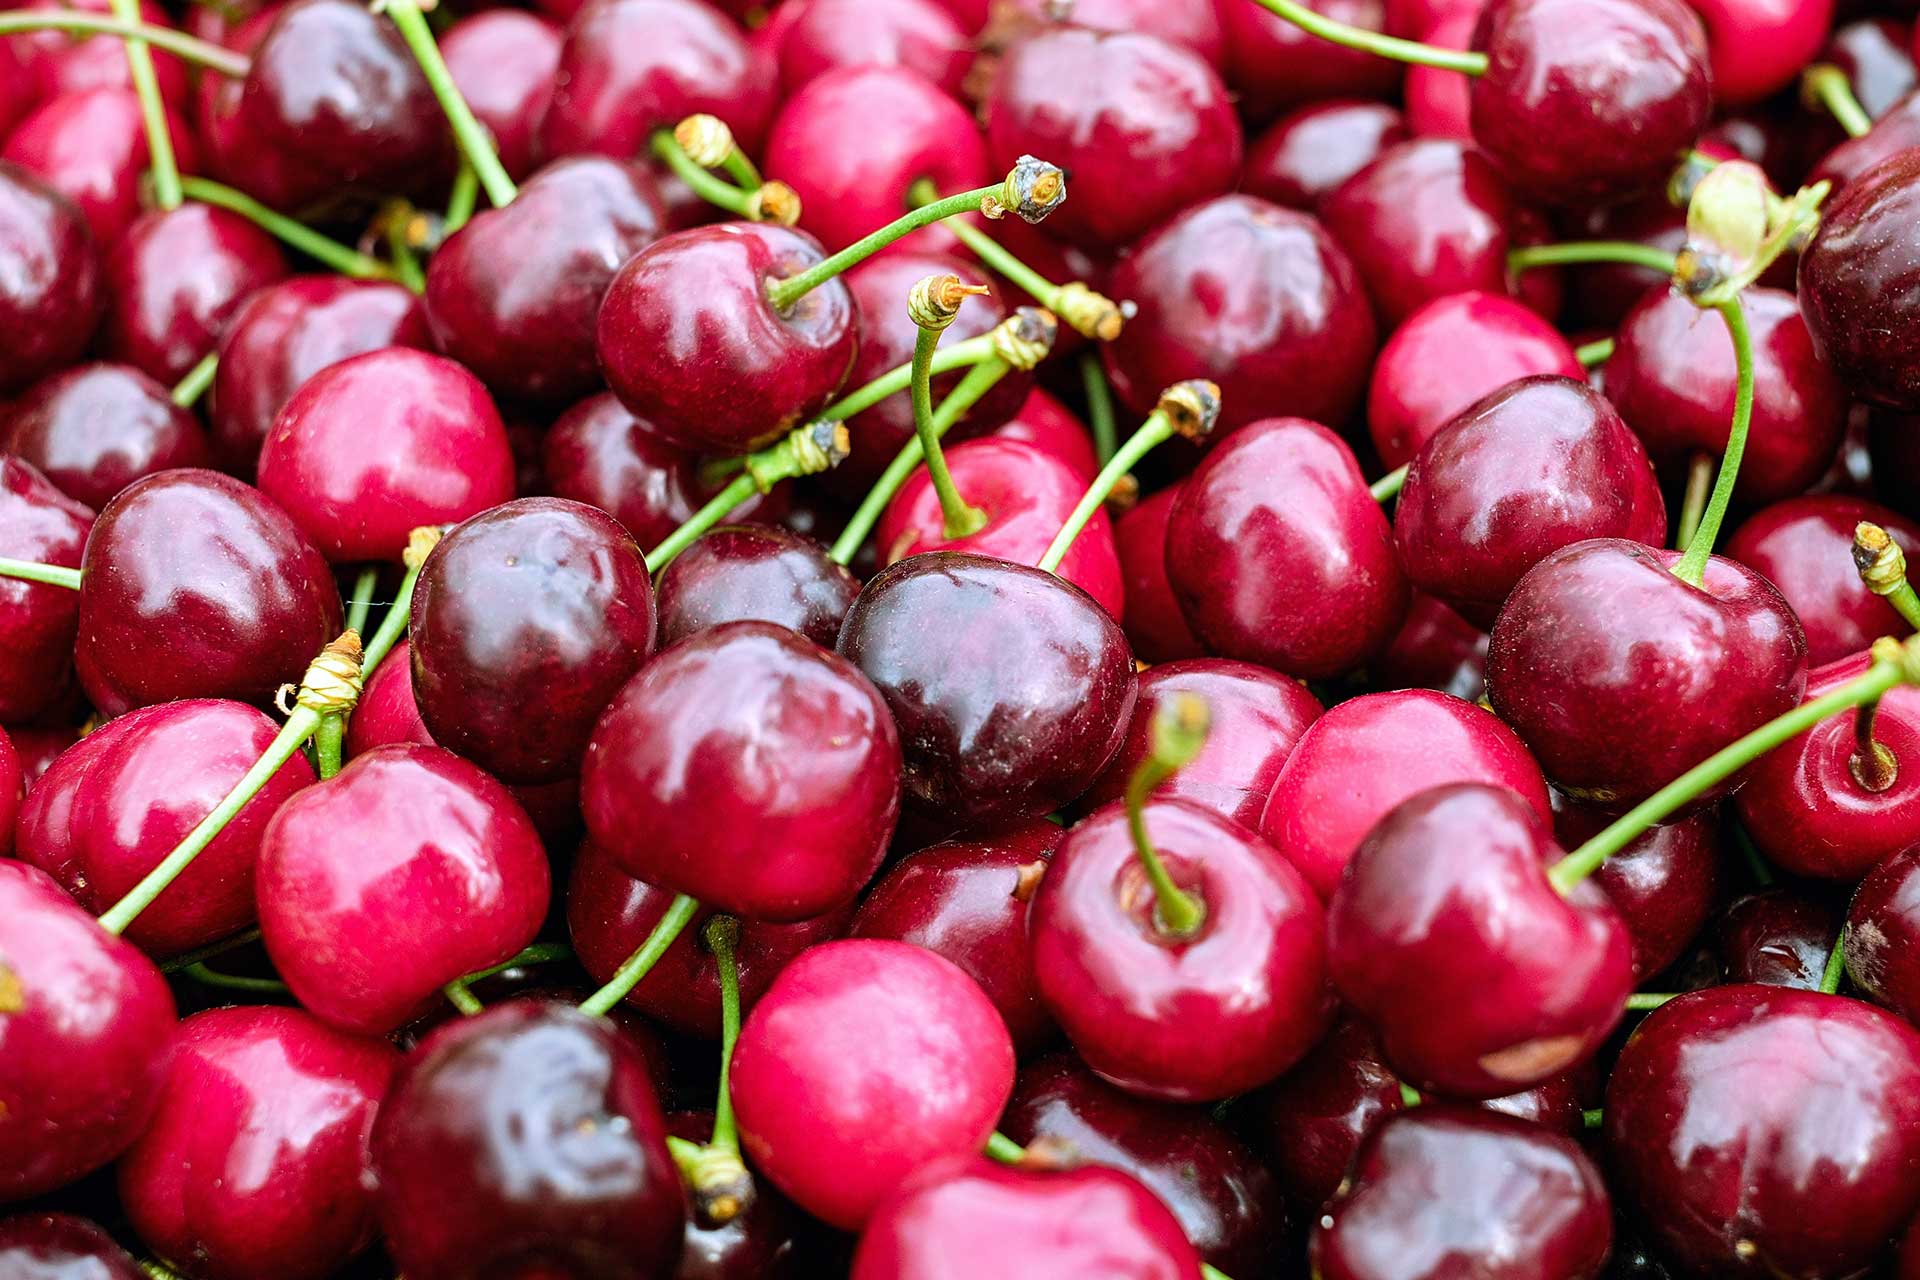 10 Proven Health Benefits Of Cherries That You Need To Know About F